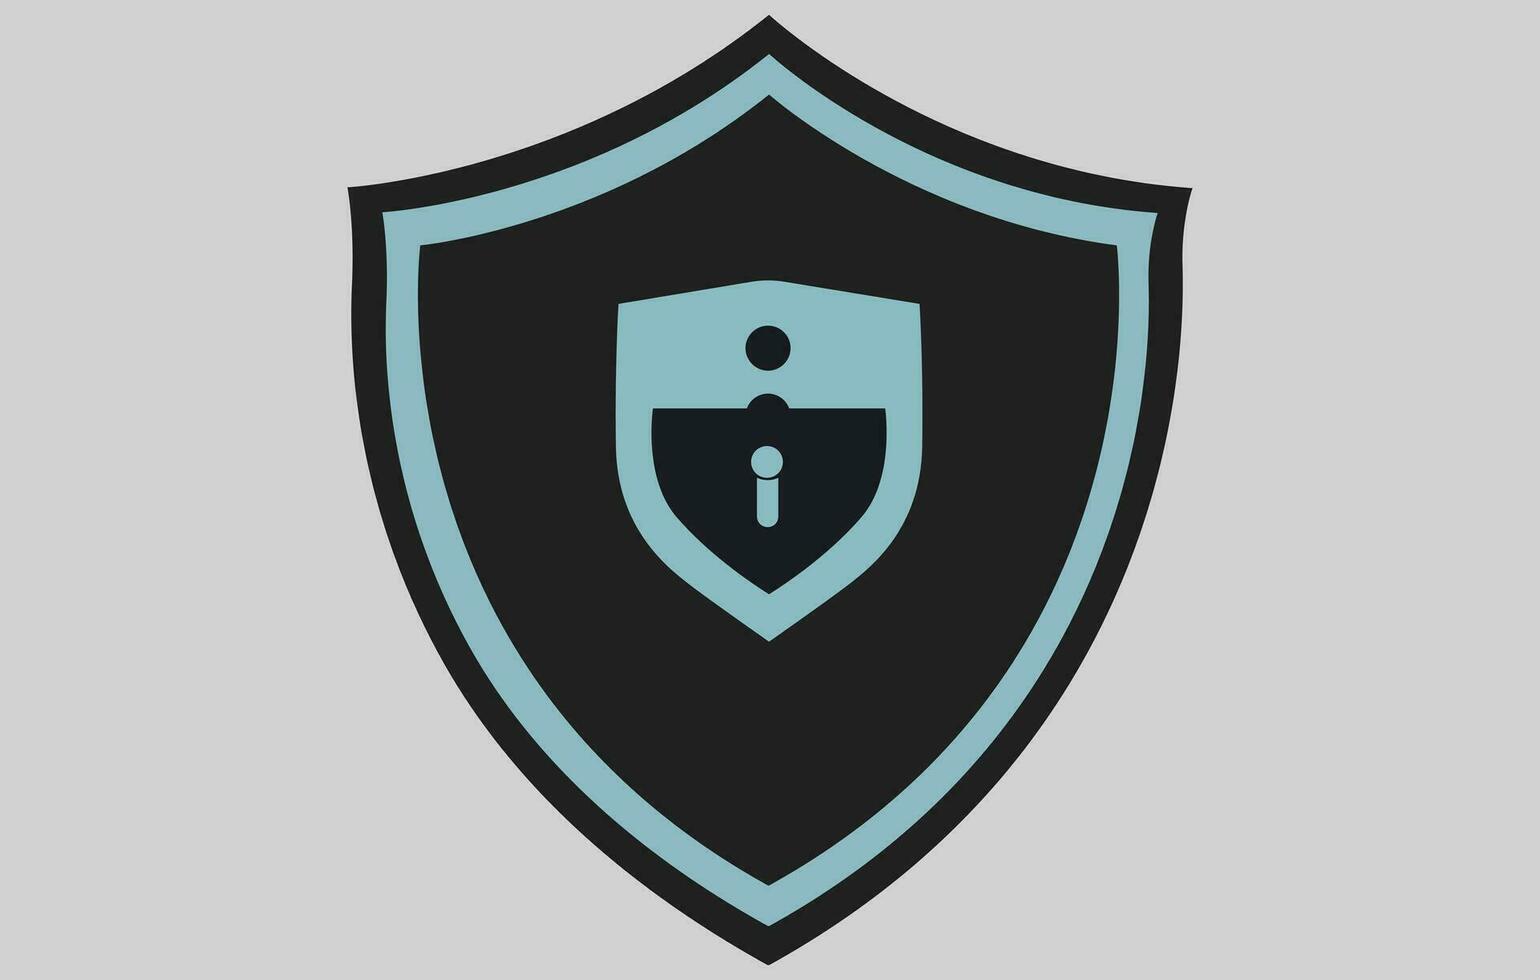 Security Shield With Padlock logo,Shield security with lock symbol. Protection, safety, password security vector icon illustration